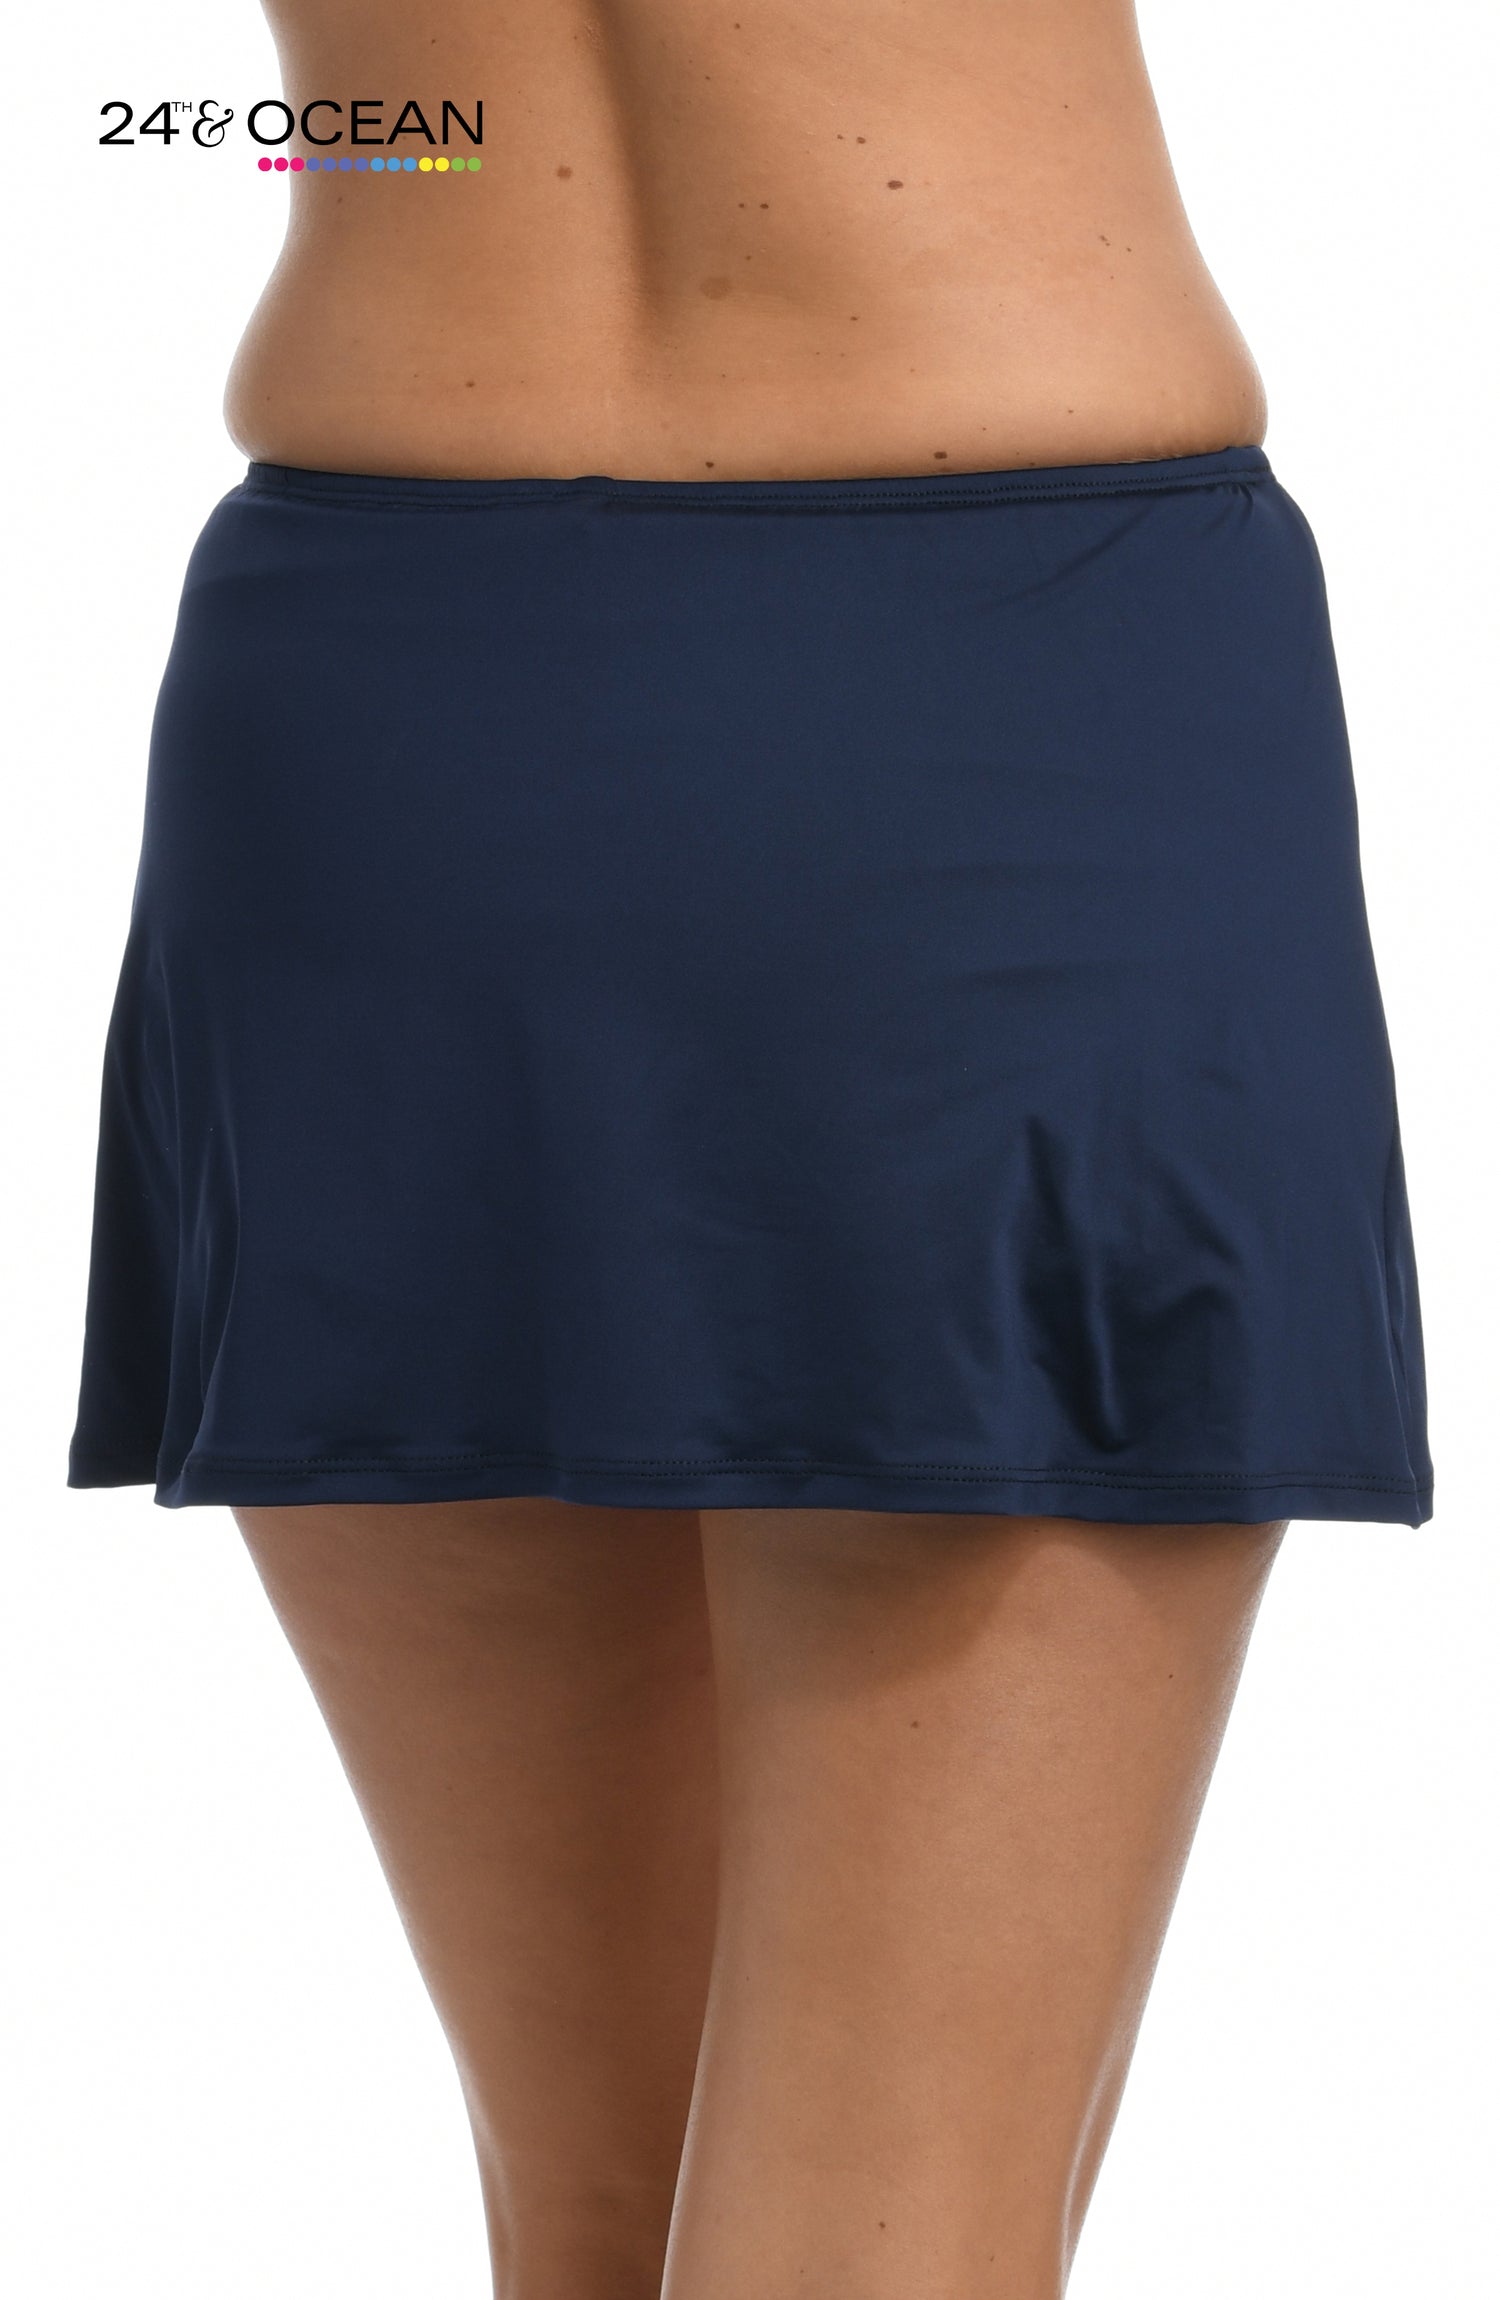 Model is wearing a solid midnight blue colored skirted hipster bottom from our 24th & Ocean brand.